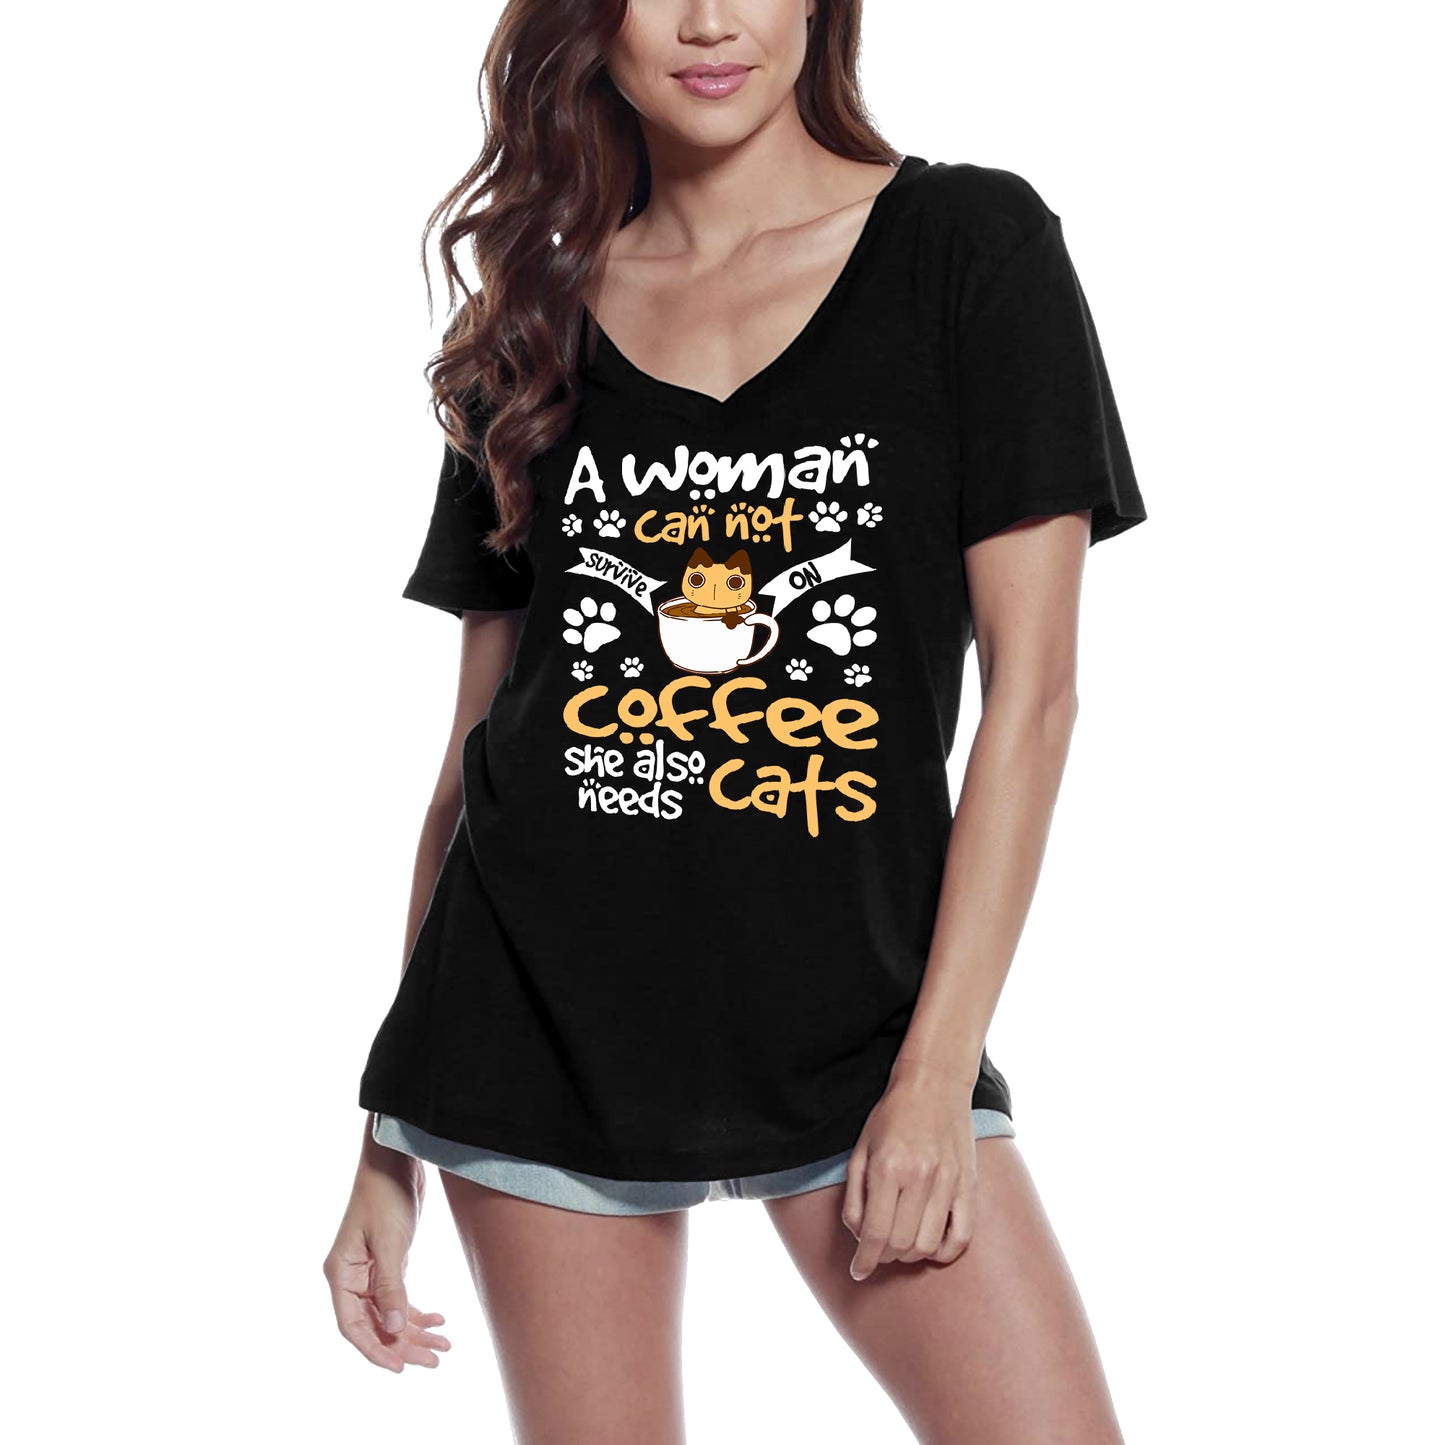 ULTRABASIC Women's T-Shirt A Woman Can Not Survive on Coffee Alone She Needs Cats - Funny Kitten Shirt for Cat Lovers